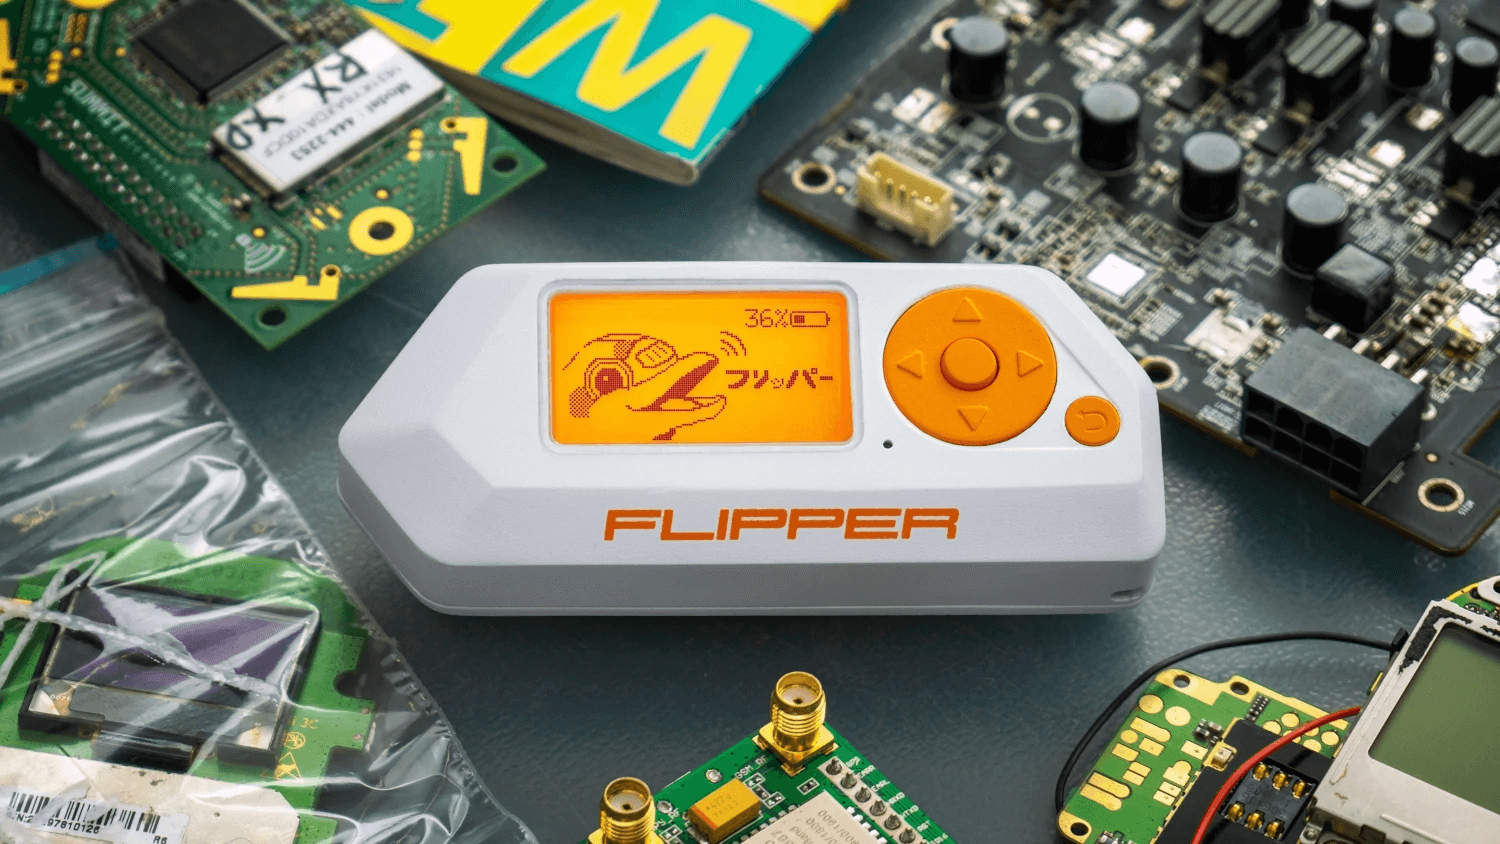 How I Hacked My Garage Remote With a Flipper Zero &  Microchip Programmer